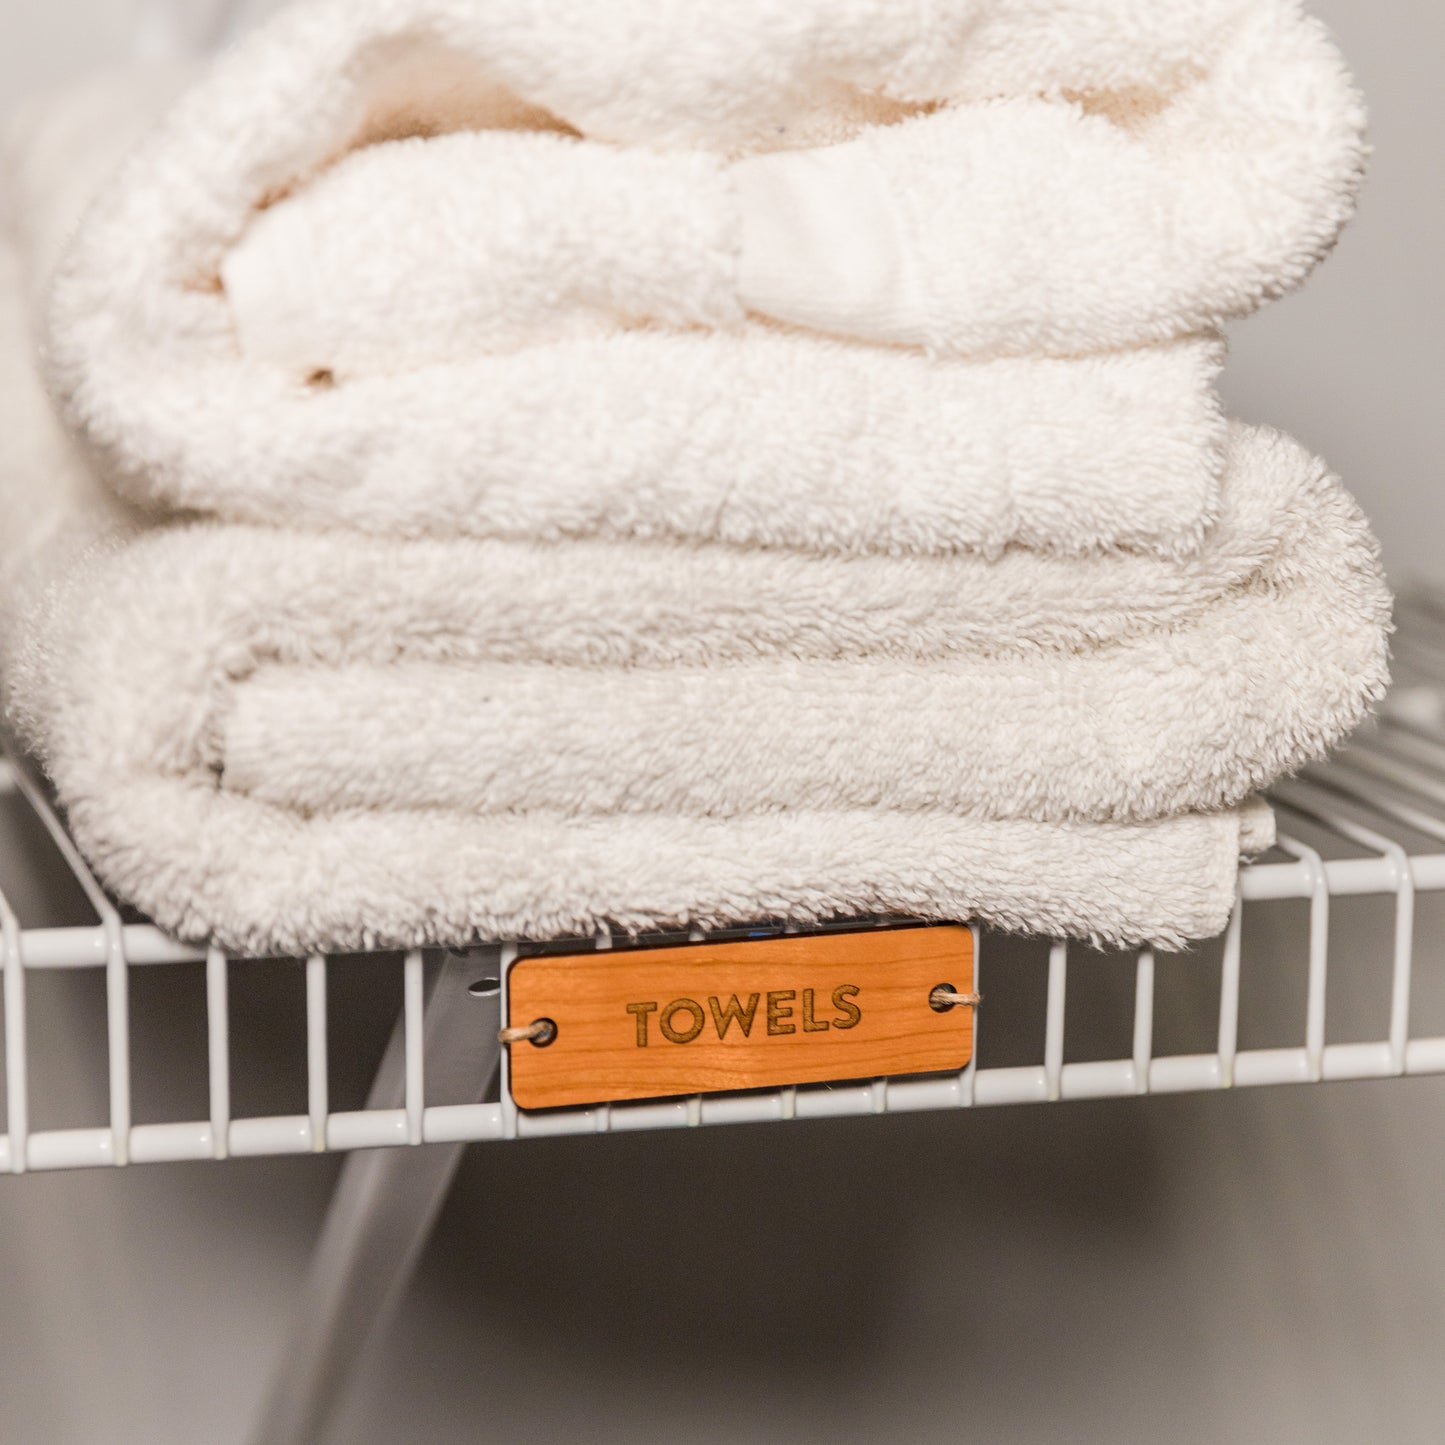 Tie-On Labels for Closet Organization - Cherry Wood Towels on ventilated wire shelving - by LeeMo Designs in Bend, Oregon